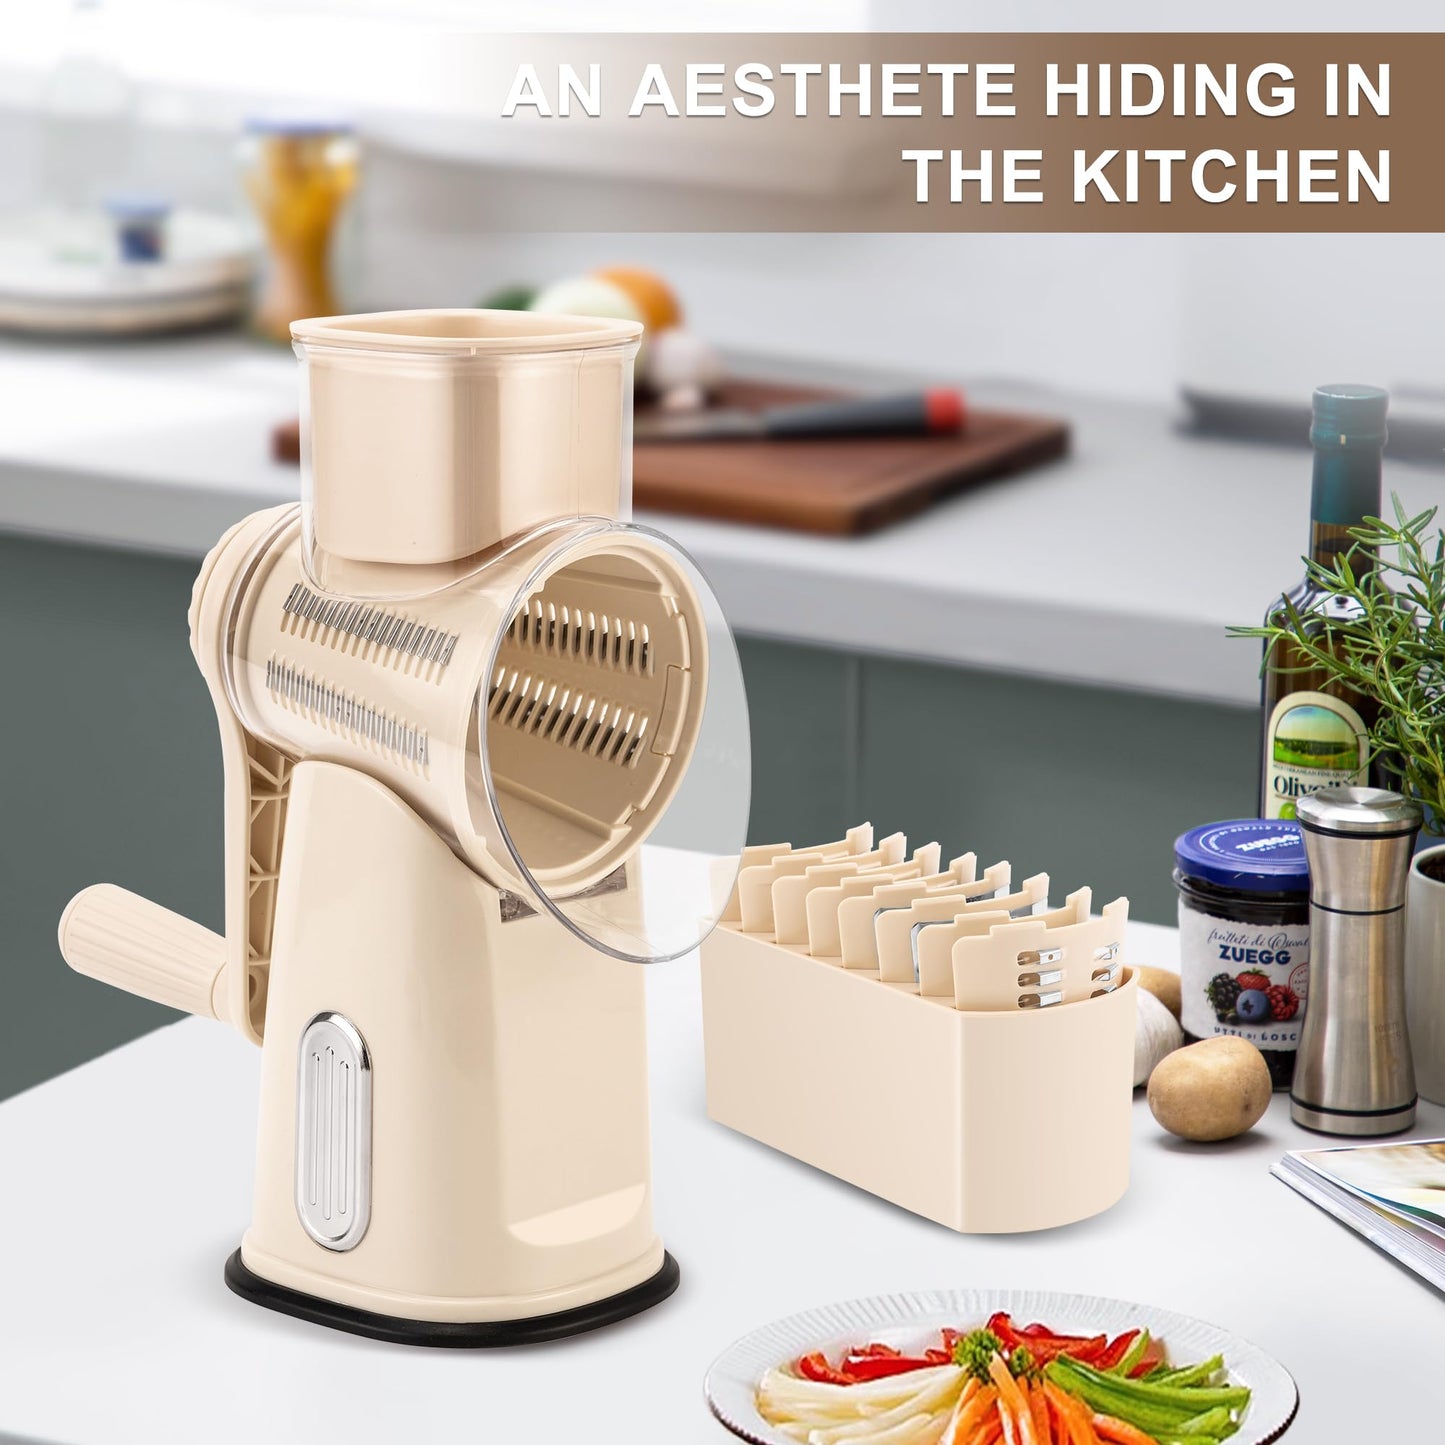 SUSTEAS Rotary Cheese Grater with Handle, Vegetable Food Shredder with 5 Well-designed Blades & Strong Suction Base, Round Mandoline Slicer & Fruit Slicer for Kitchen (Beige)